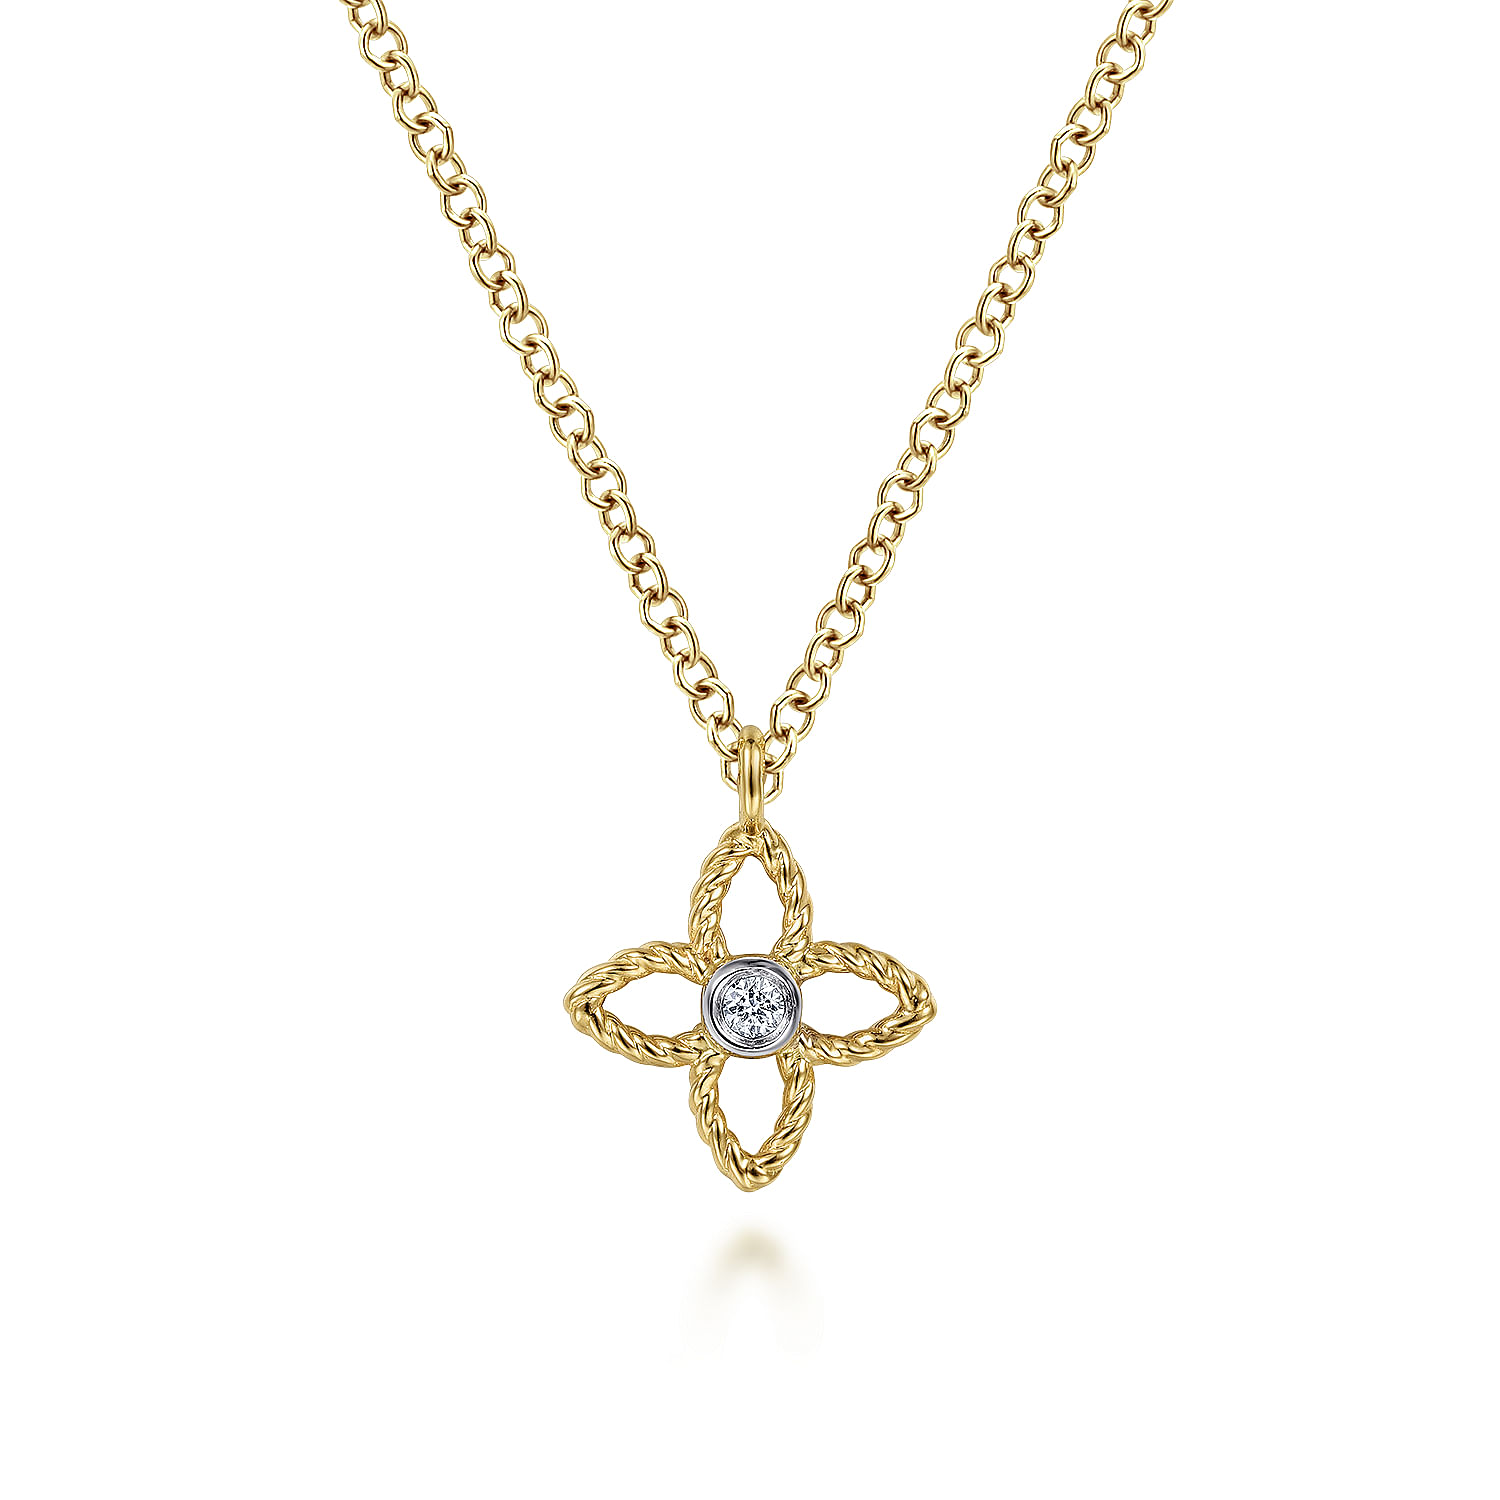 Gabriel - 14K Yellow-White Gold Twisted Rope Quatrefoil Pendant Necklace with Diamond Center